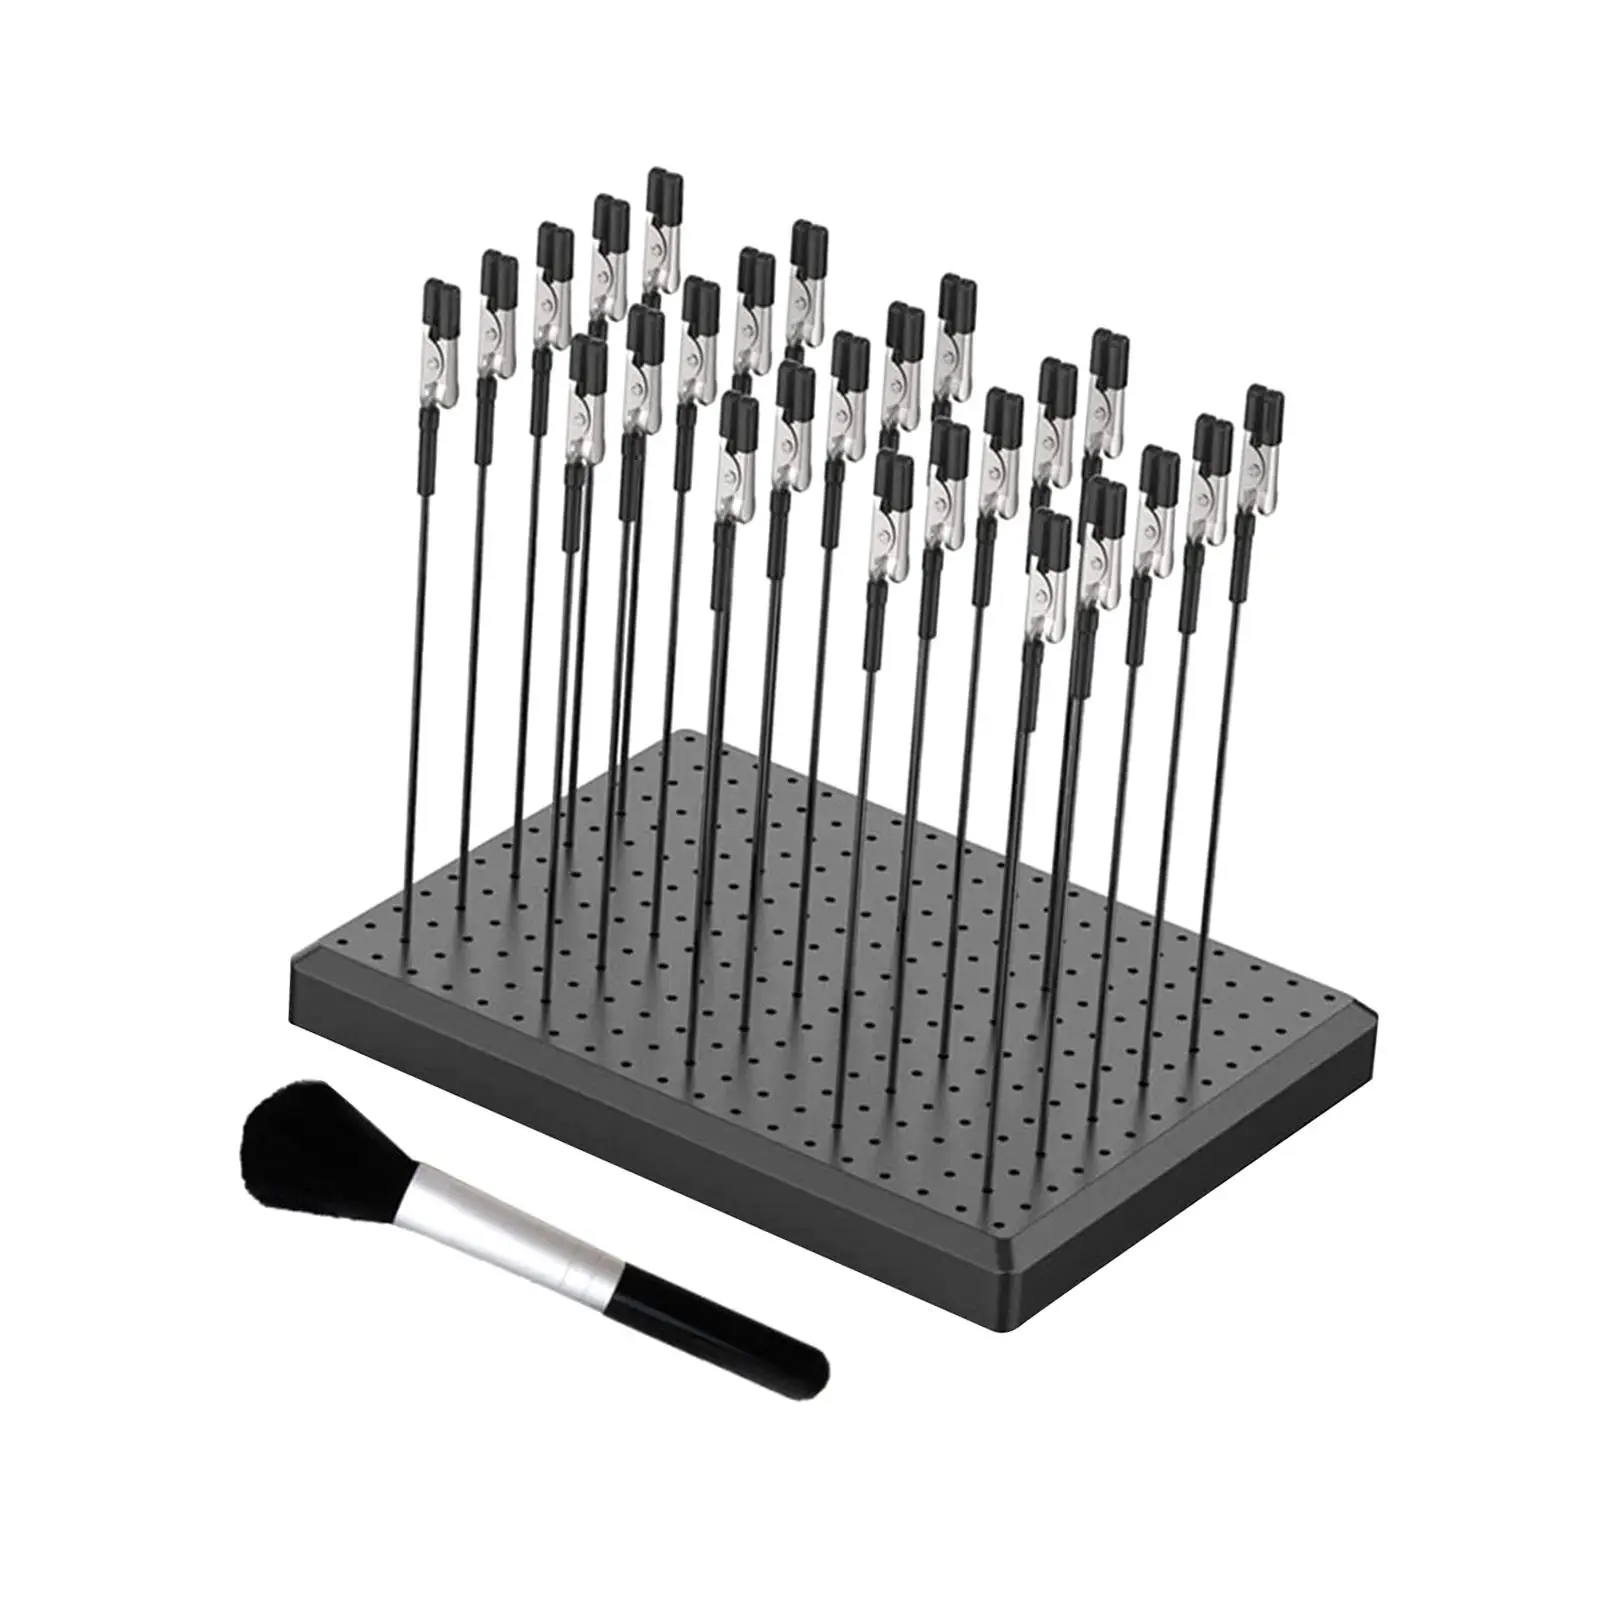 Painting Stand Base Holder and 10Pcs Alligator Clip Sticks Set Fit Exactly No Wobble Multipurpose Professional Modeling Tool